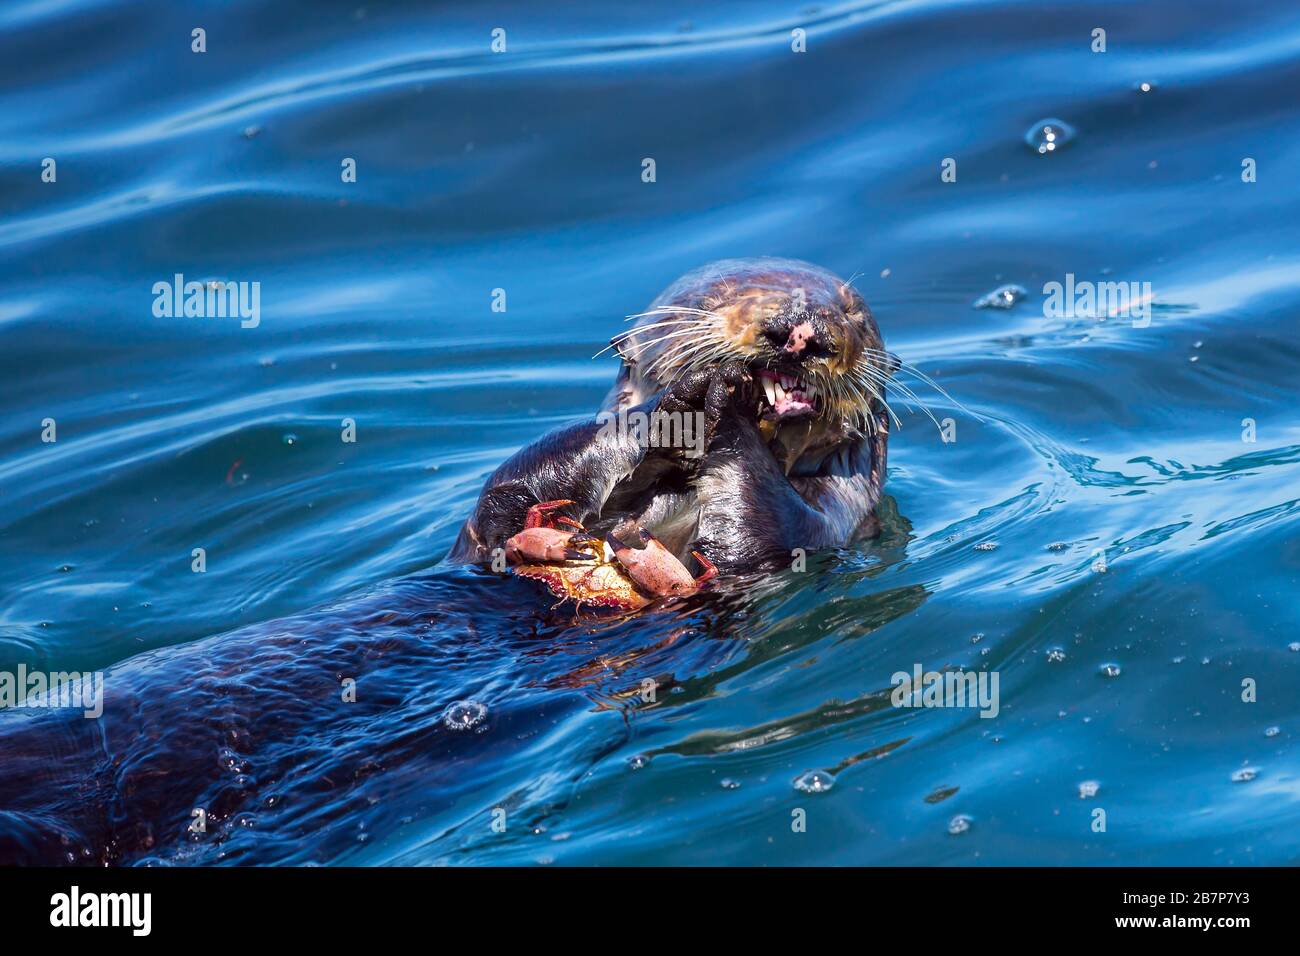 Sea otter eating a crab Stock Photo